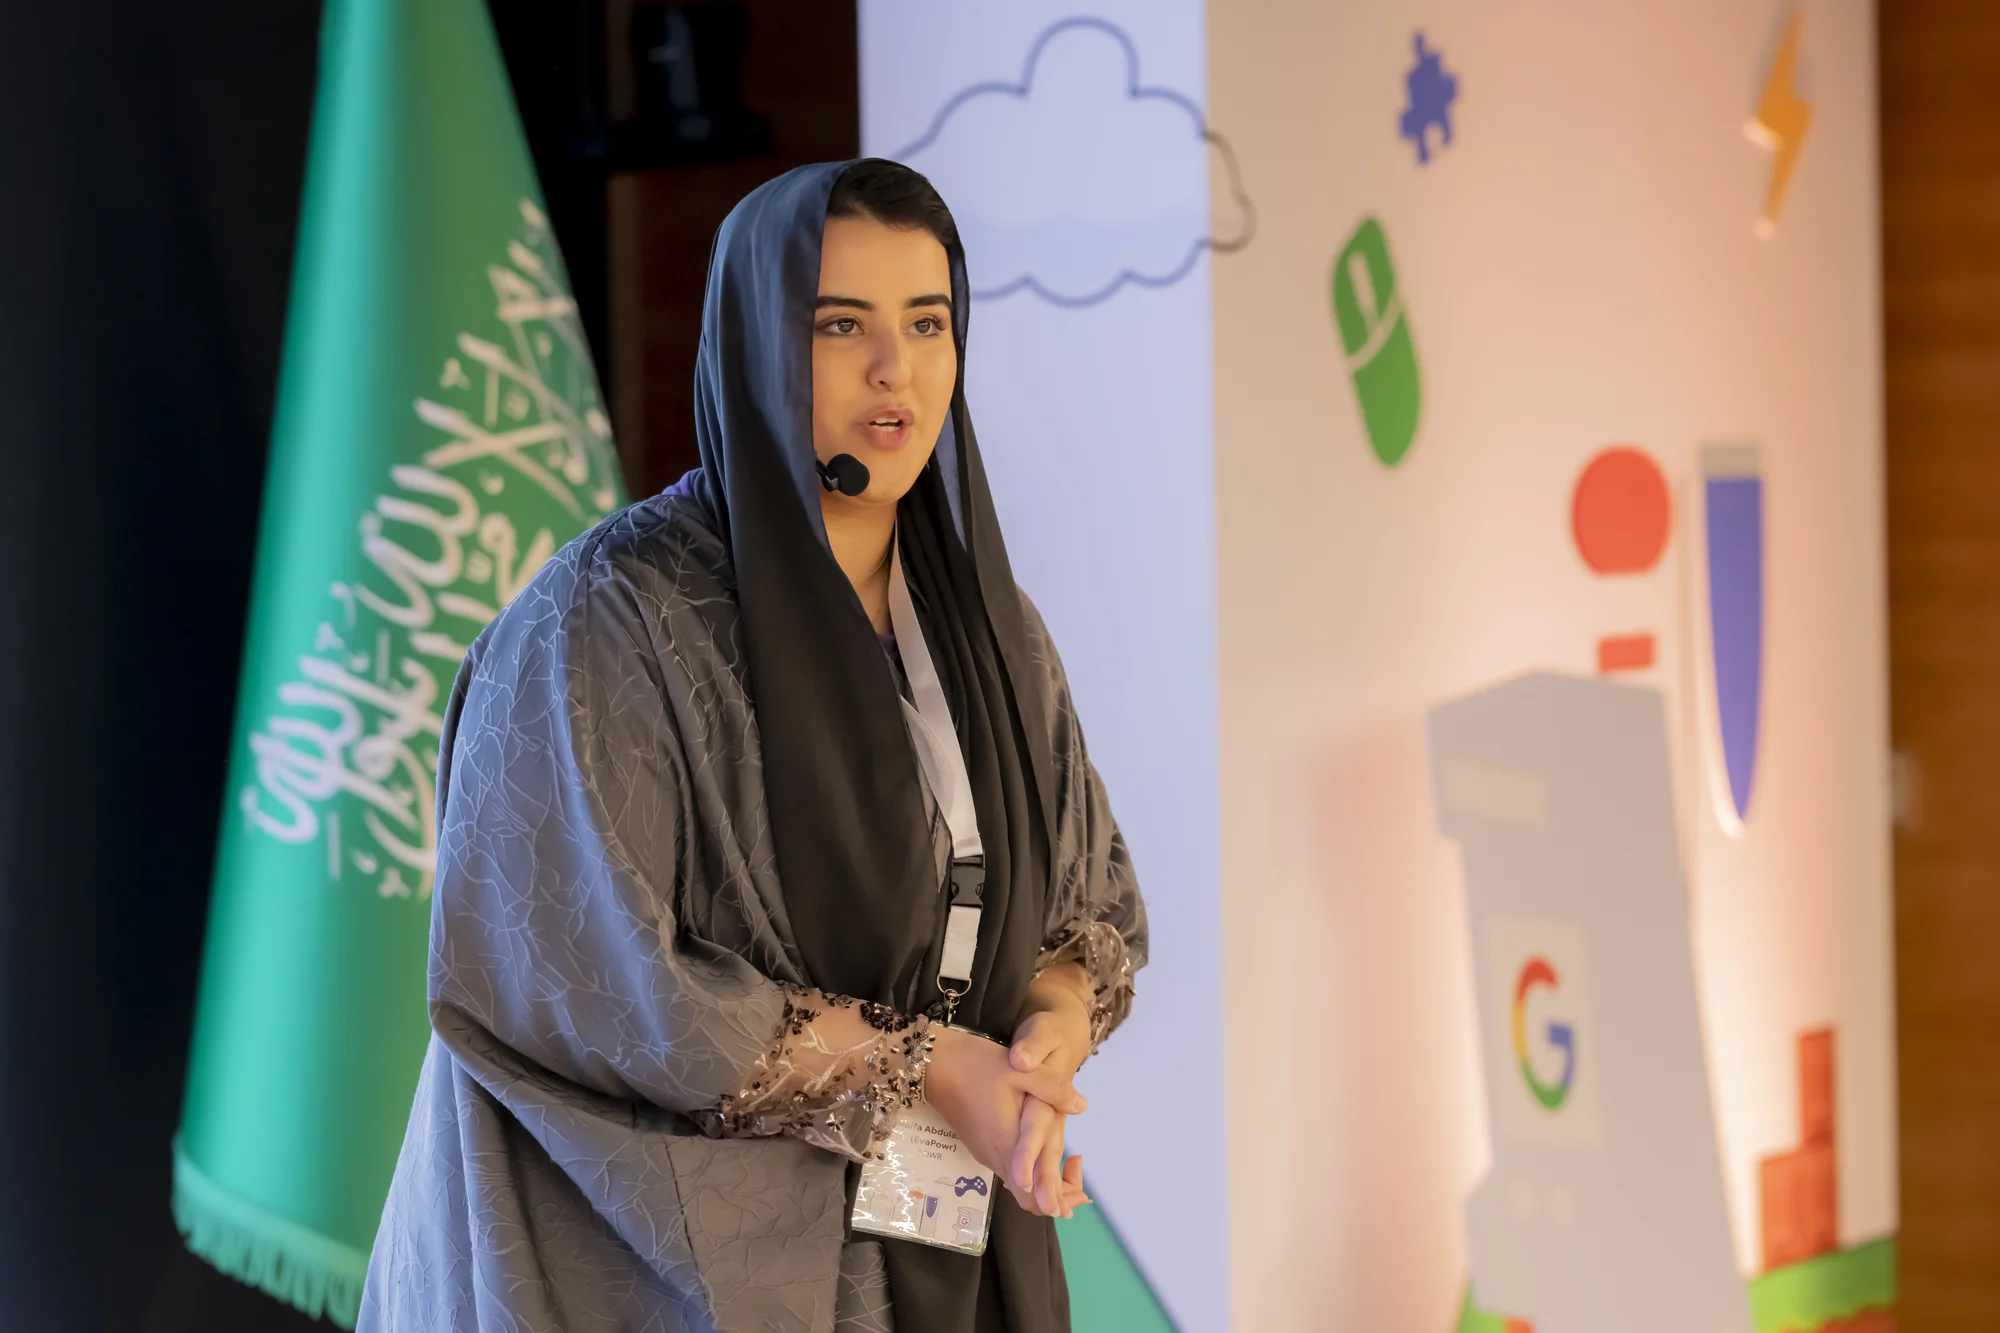 A picture of Haifa Abdulaziz (POWREVA) a content creator, wearing a grey abaya and scarf , presenting a lightening talk at yesterday's Google Gaming Forum